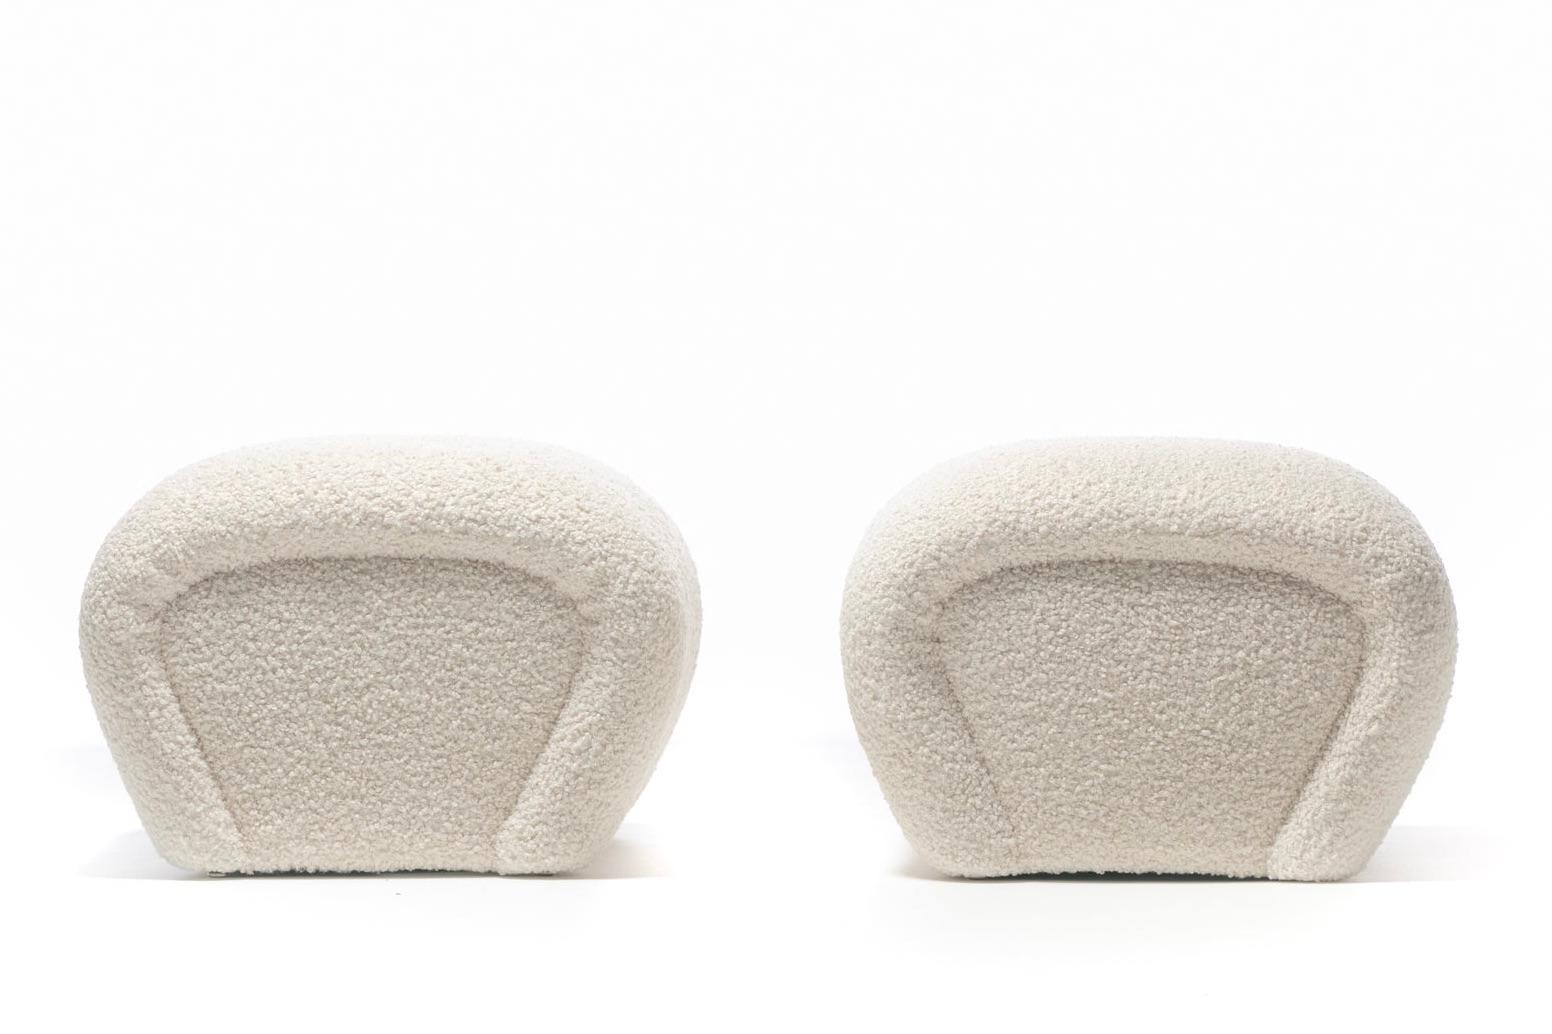 Curvy and soft Postmodern sculptural ottomans freshly reupholstered in plush highly durable ivory bouclé fabric. Reminiscent of Karl Springer's iconic Waterfall Ottomans or Benches, the ottomans' sides curve in a similar waterfall fashion sloping